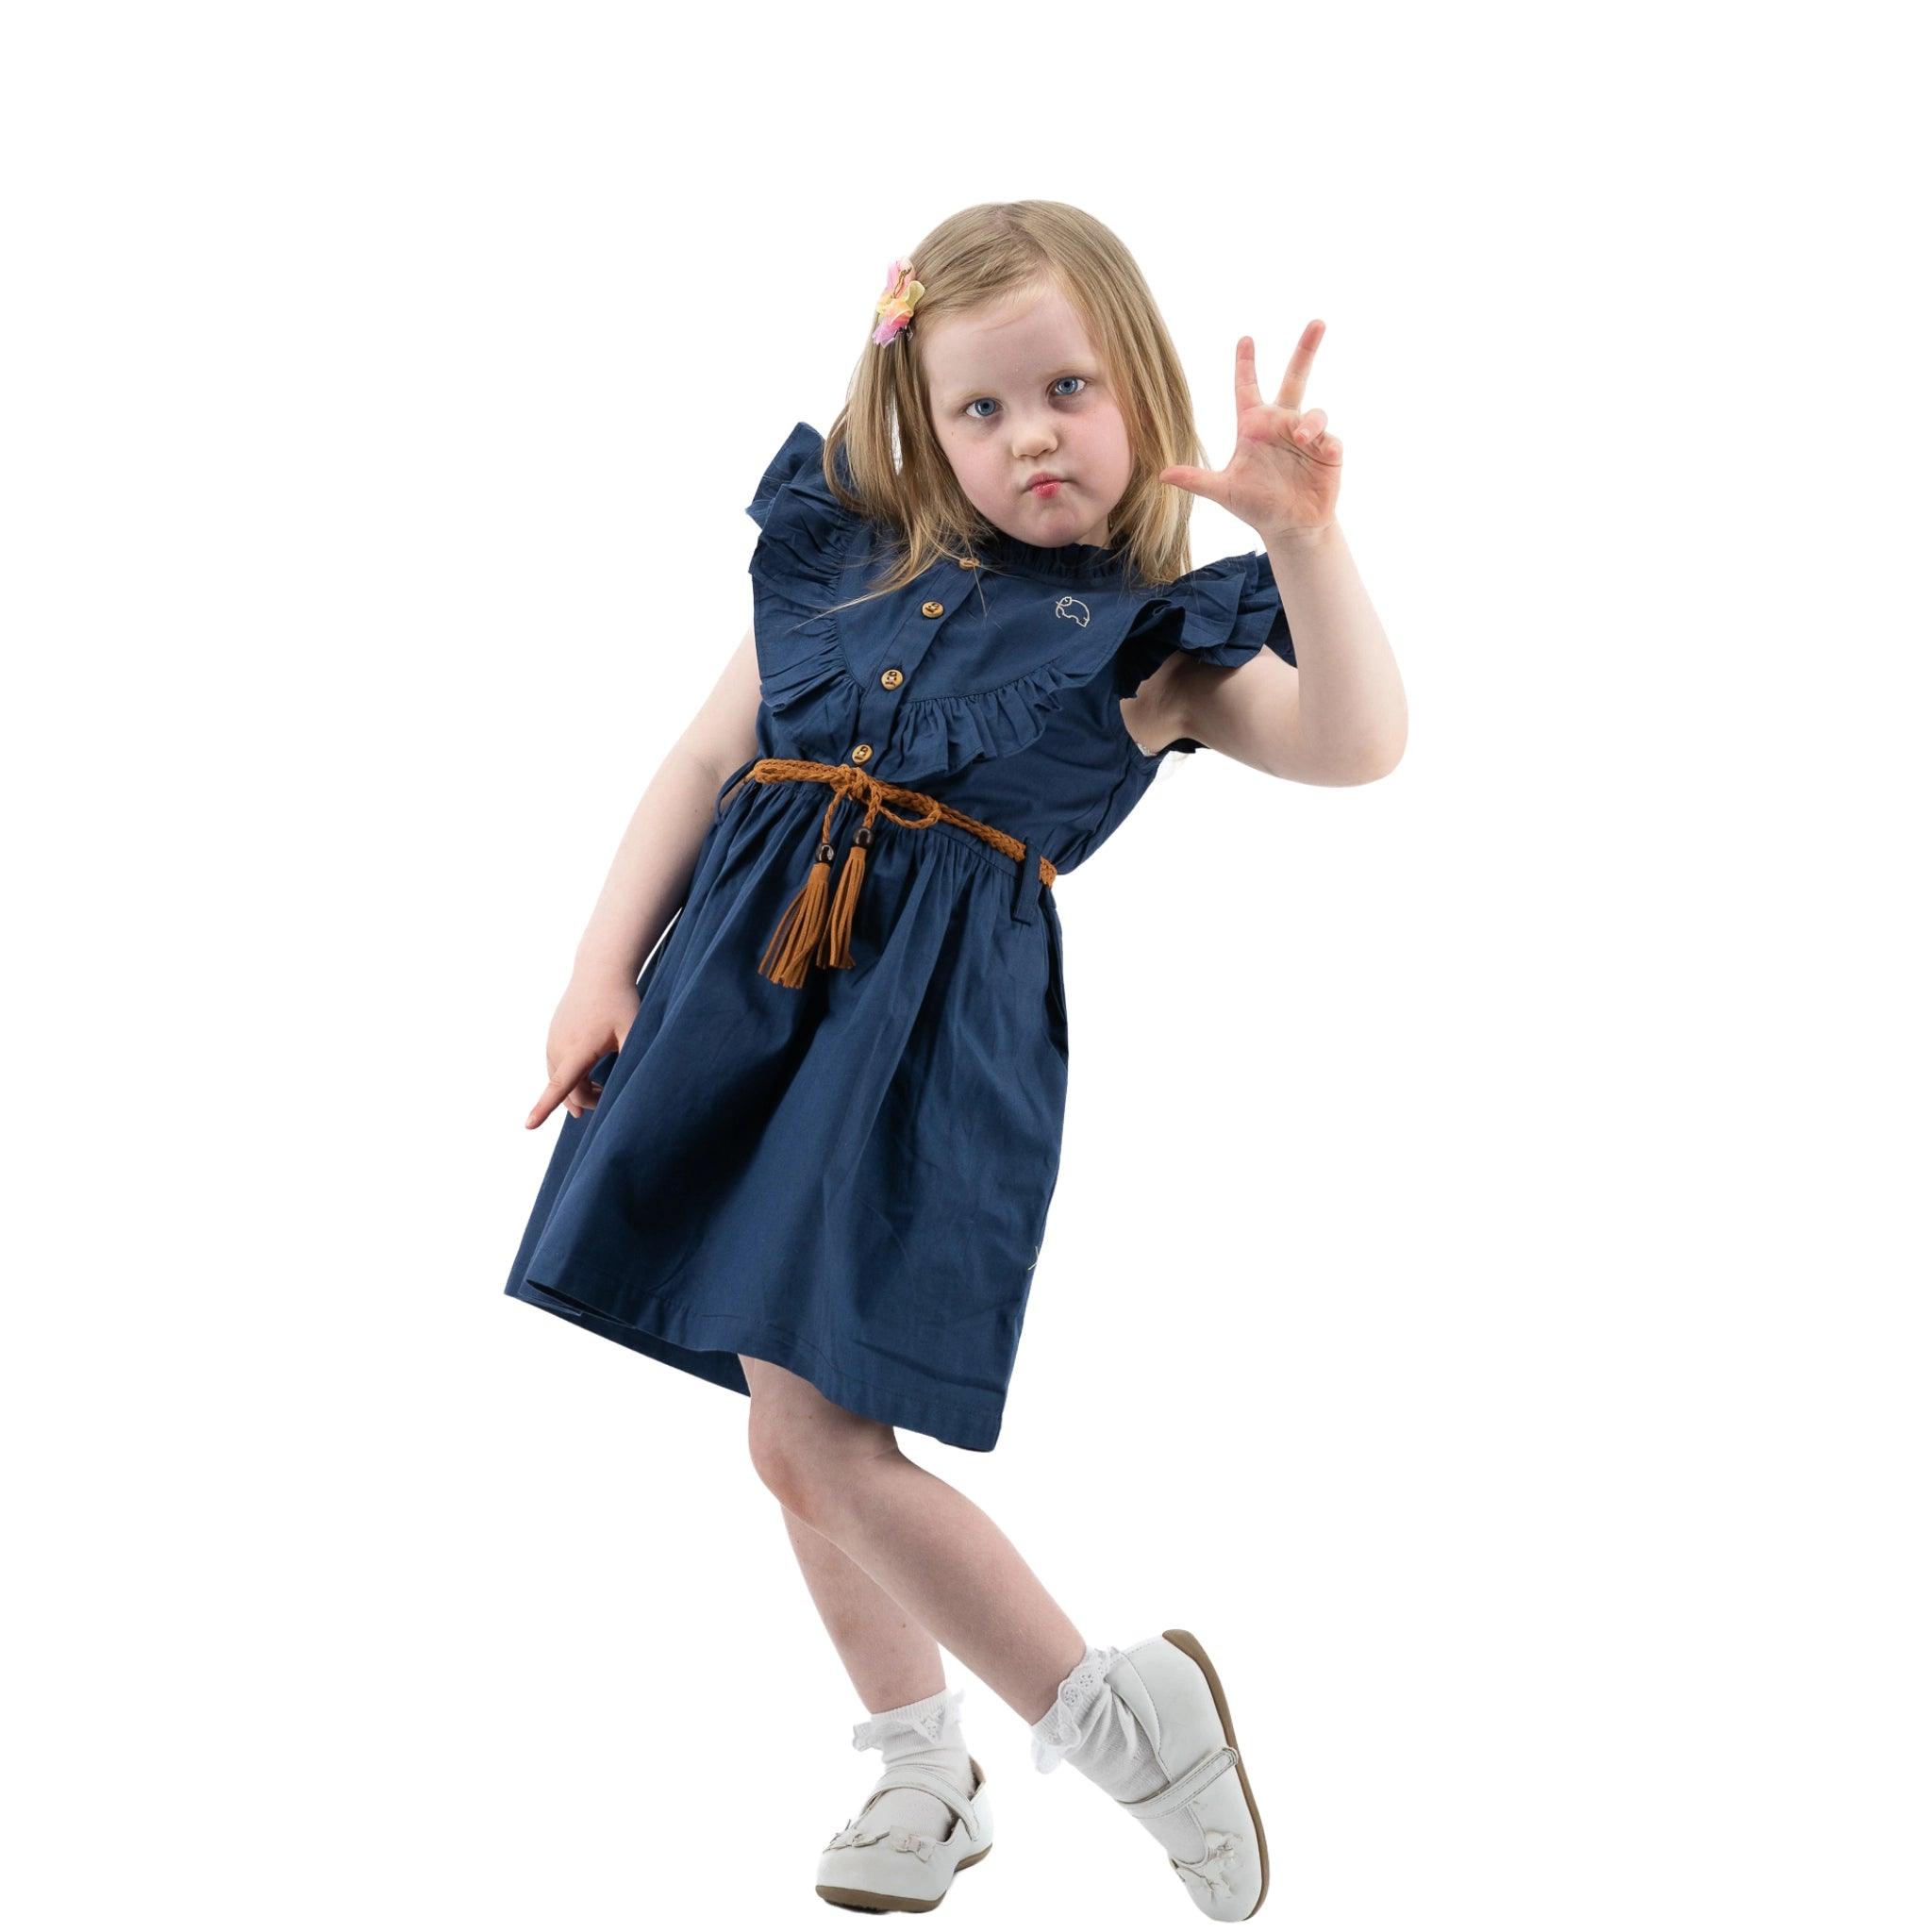 Young girl in Karee navy blue butterfly sleeve cotton dress making a peace sign with her hand, posing on one leg against a white background.